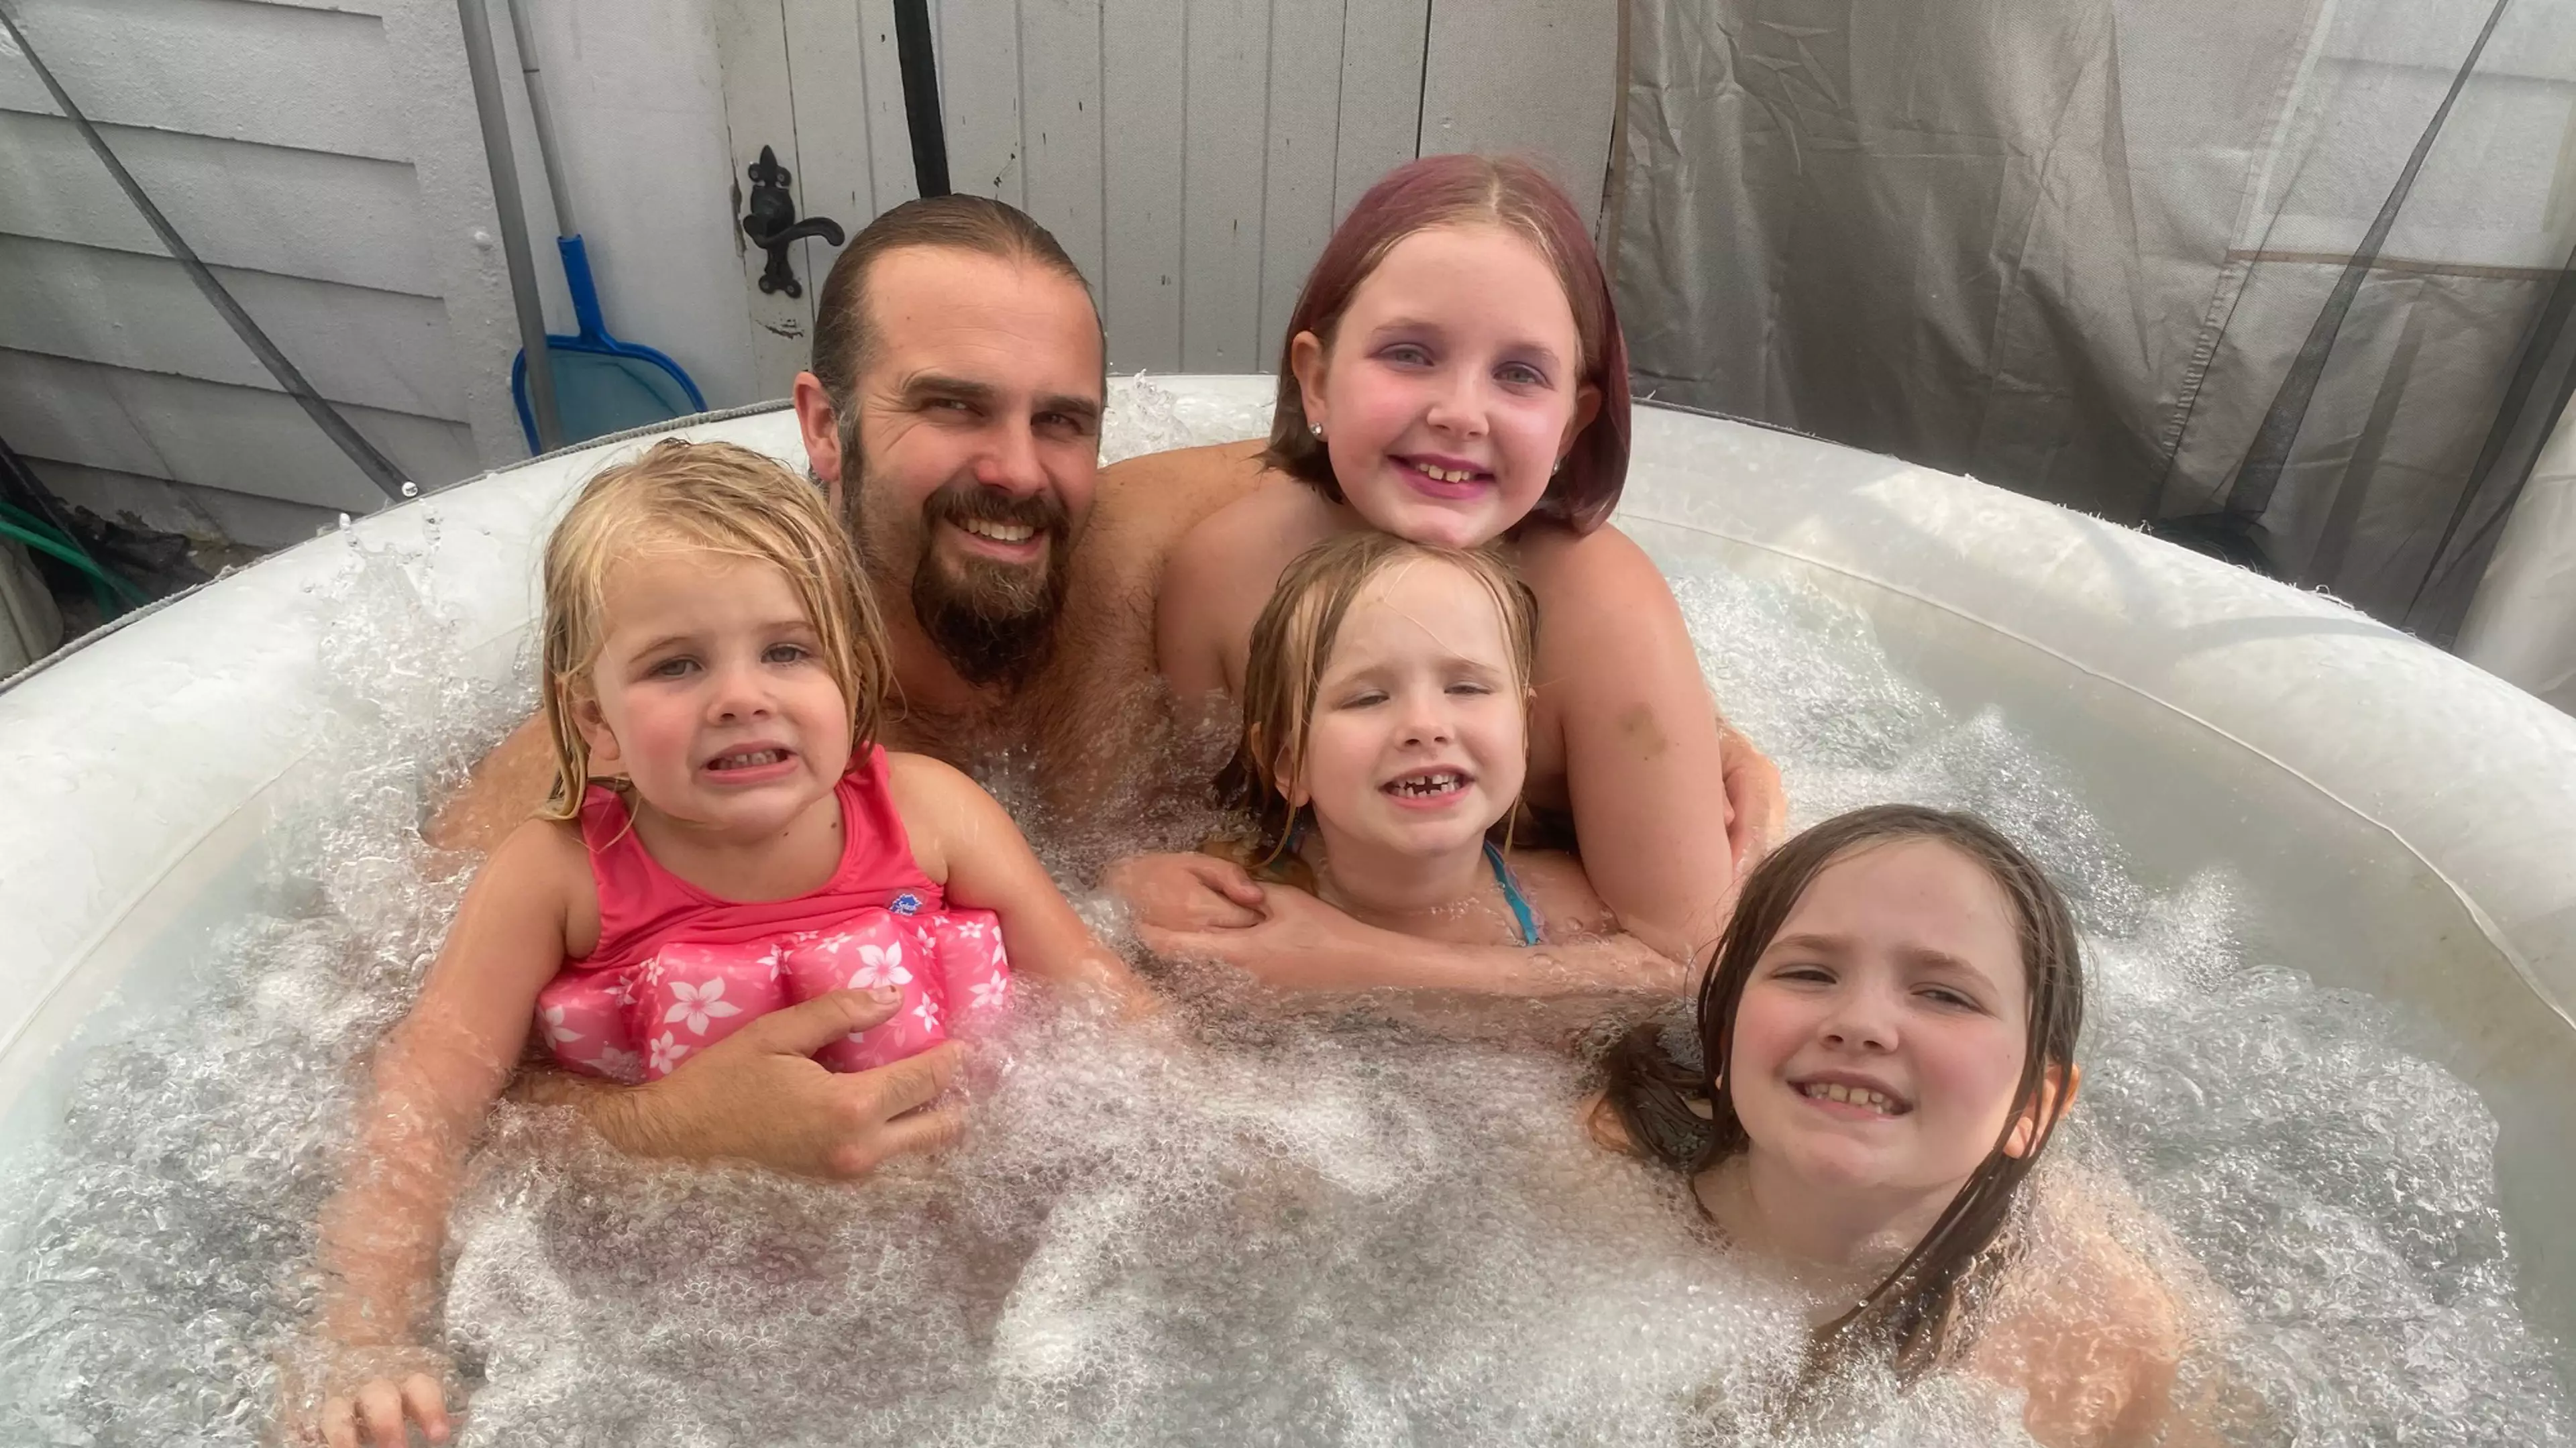 Woman Issues Warning About Hot Tubs After Her Family Were Left With Itchy Rashes